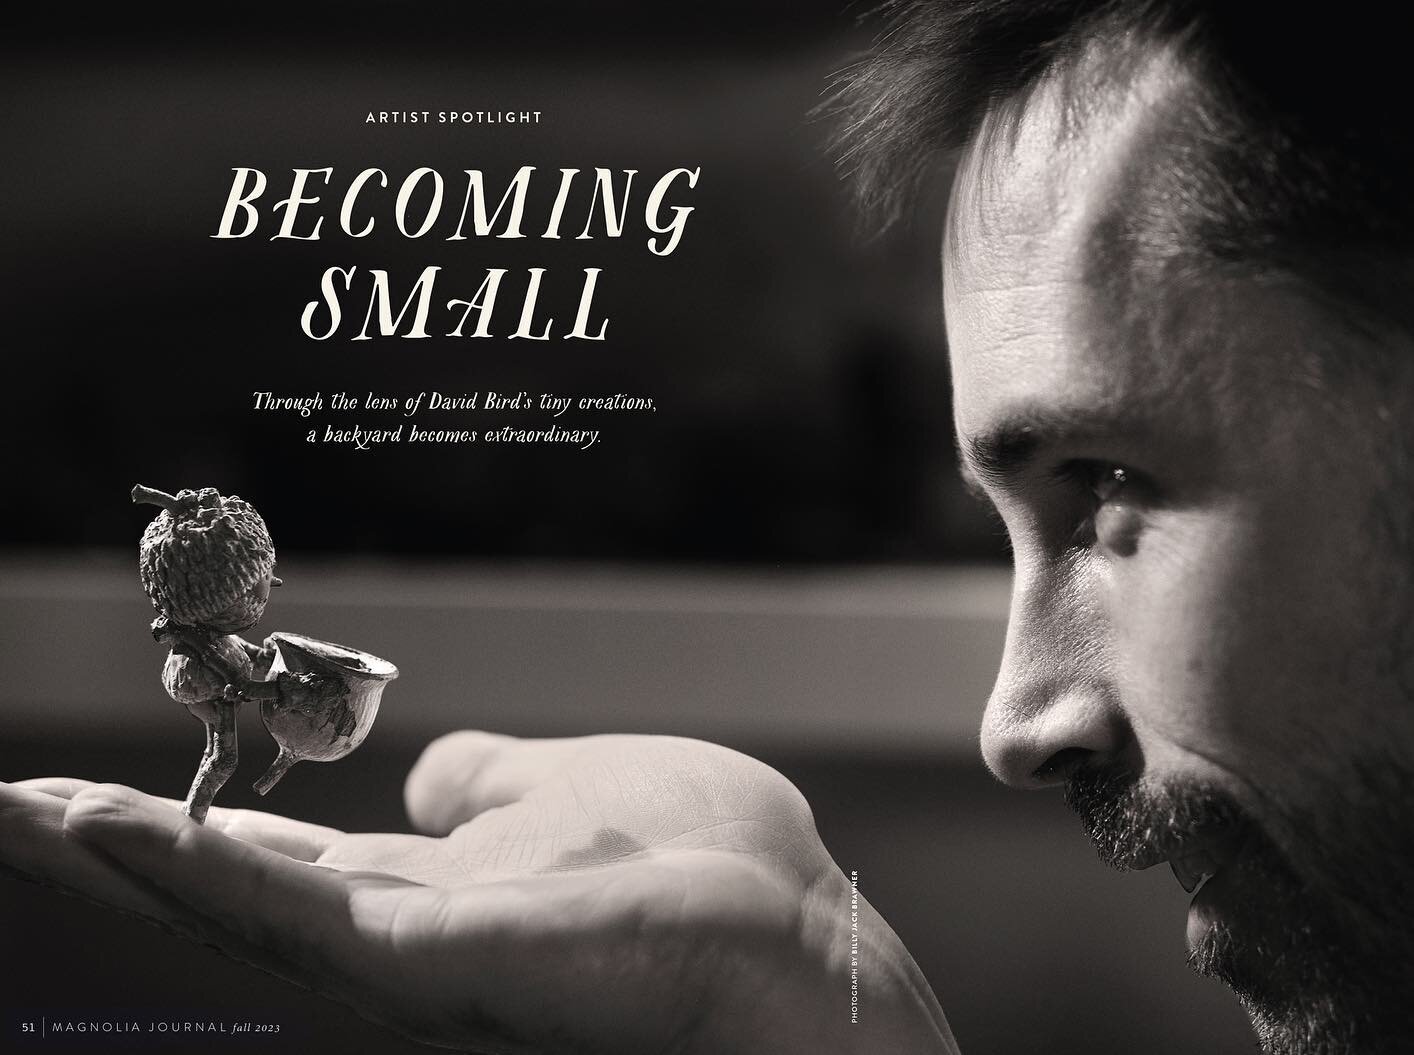 I&rsquo;m so excited that Becorns are featured in the Fall issue of @magnolia magazine! The article gives a nice little overview of how I got started making Becorns, and how they&rsquo;ve evolved over the years. The theme of the issue is perspective 